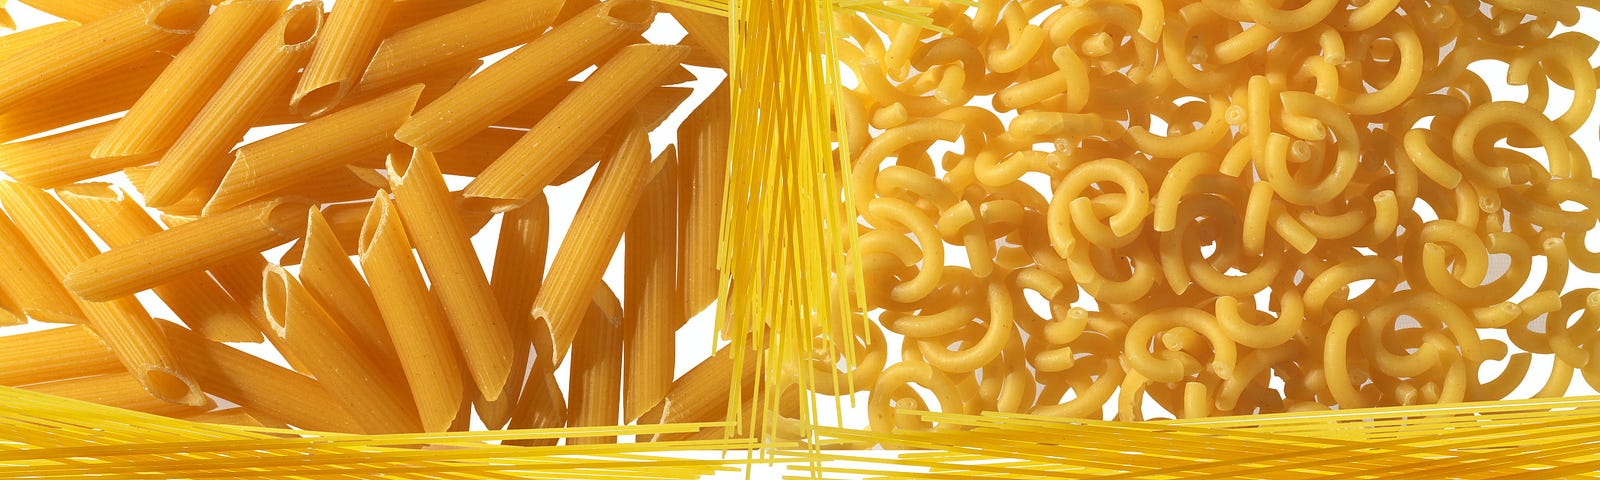 Pasta varieties, Follow These Simple Steps to Cook Your Pasta